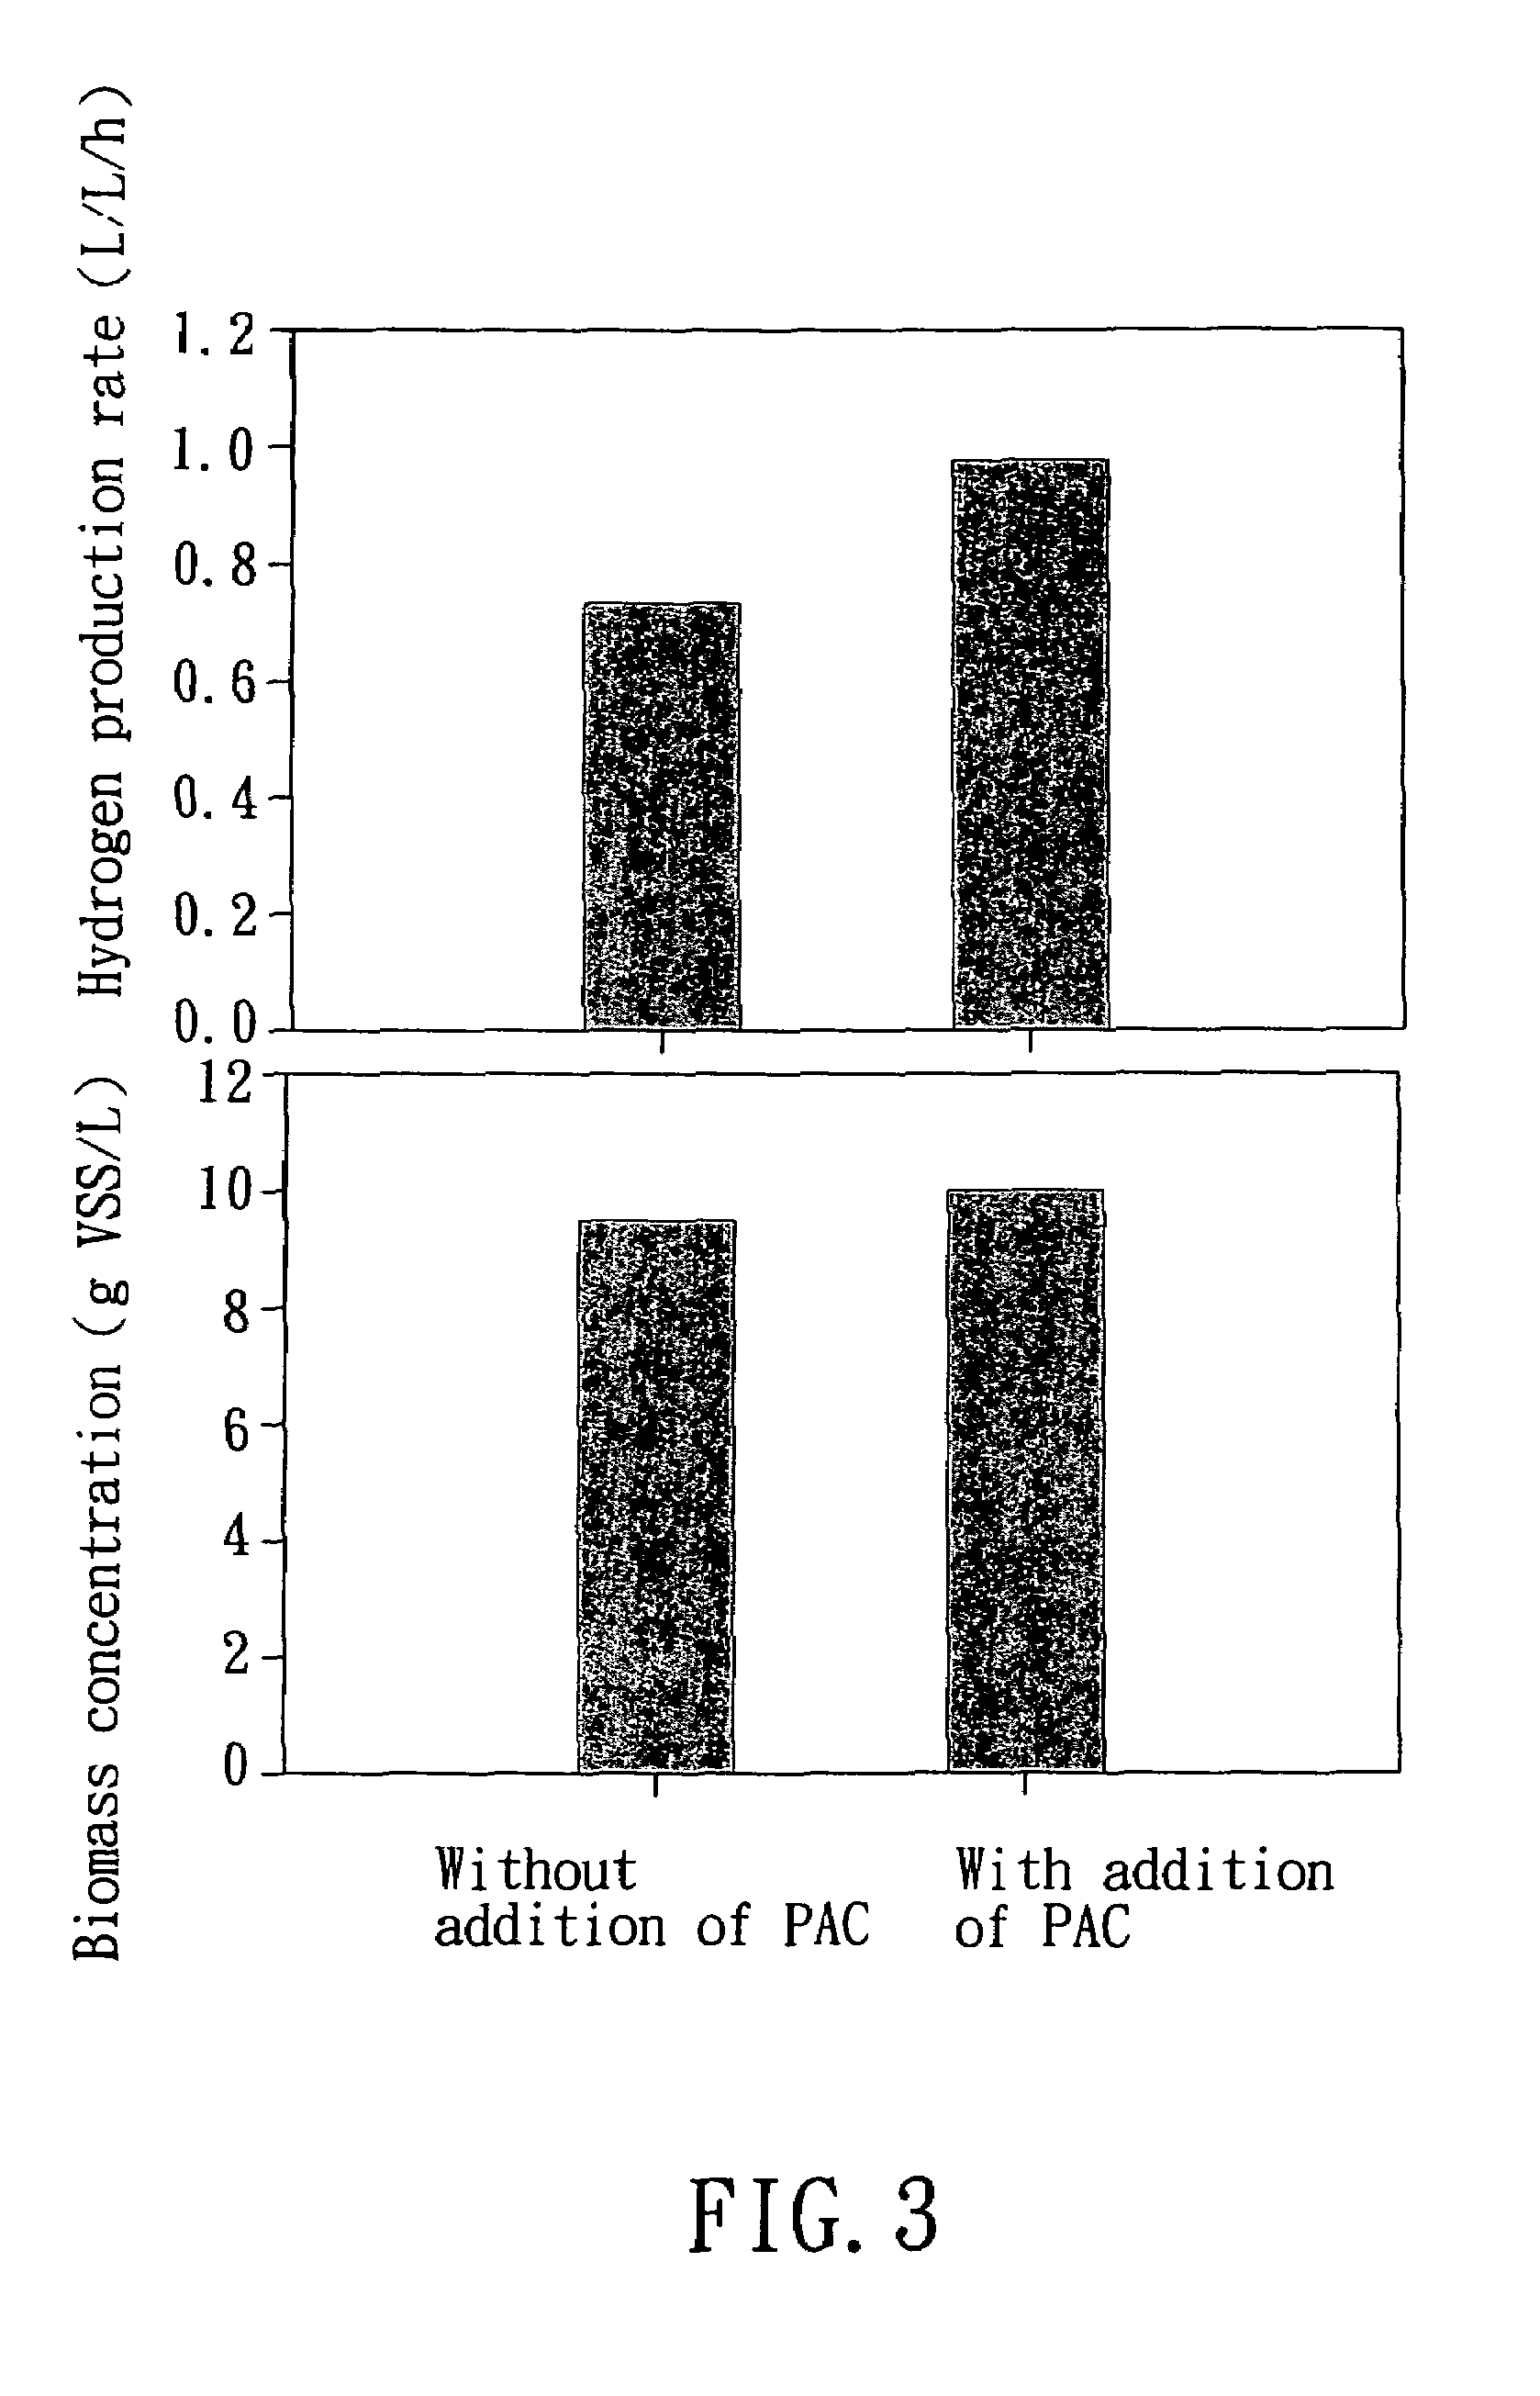 Process for enhancing anaerobic biohydrogen production